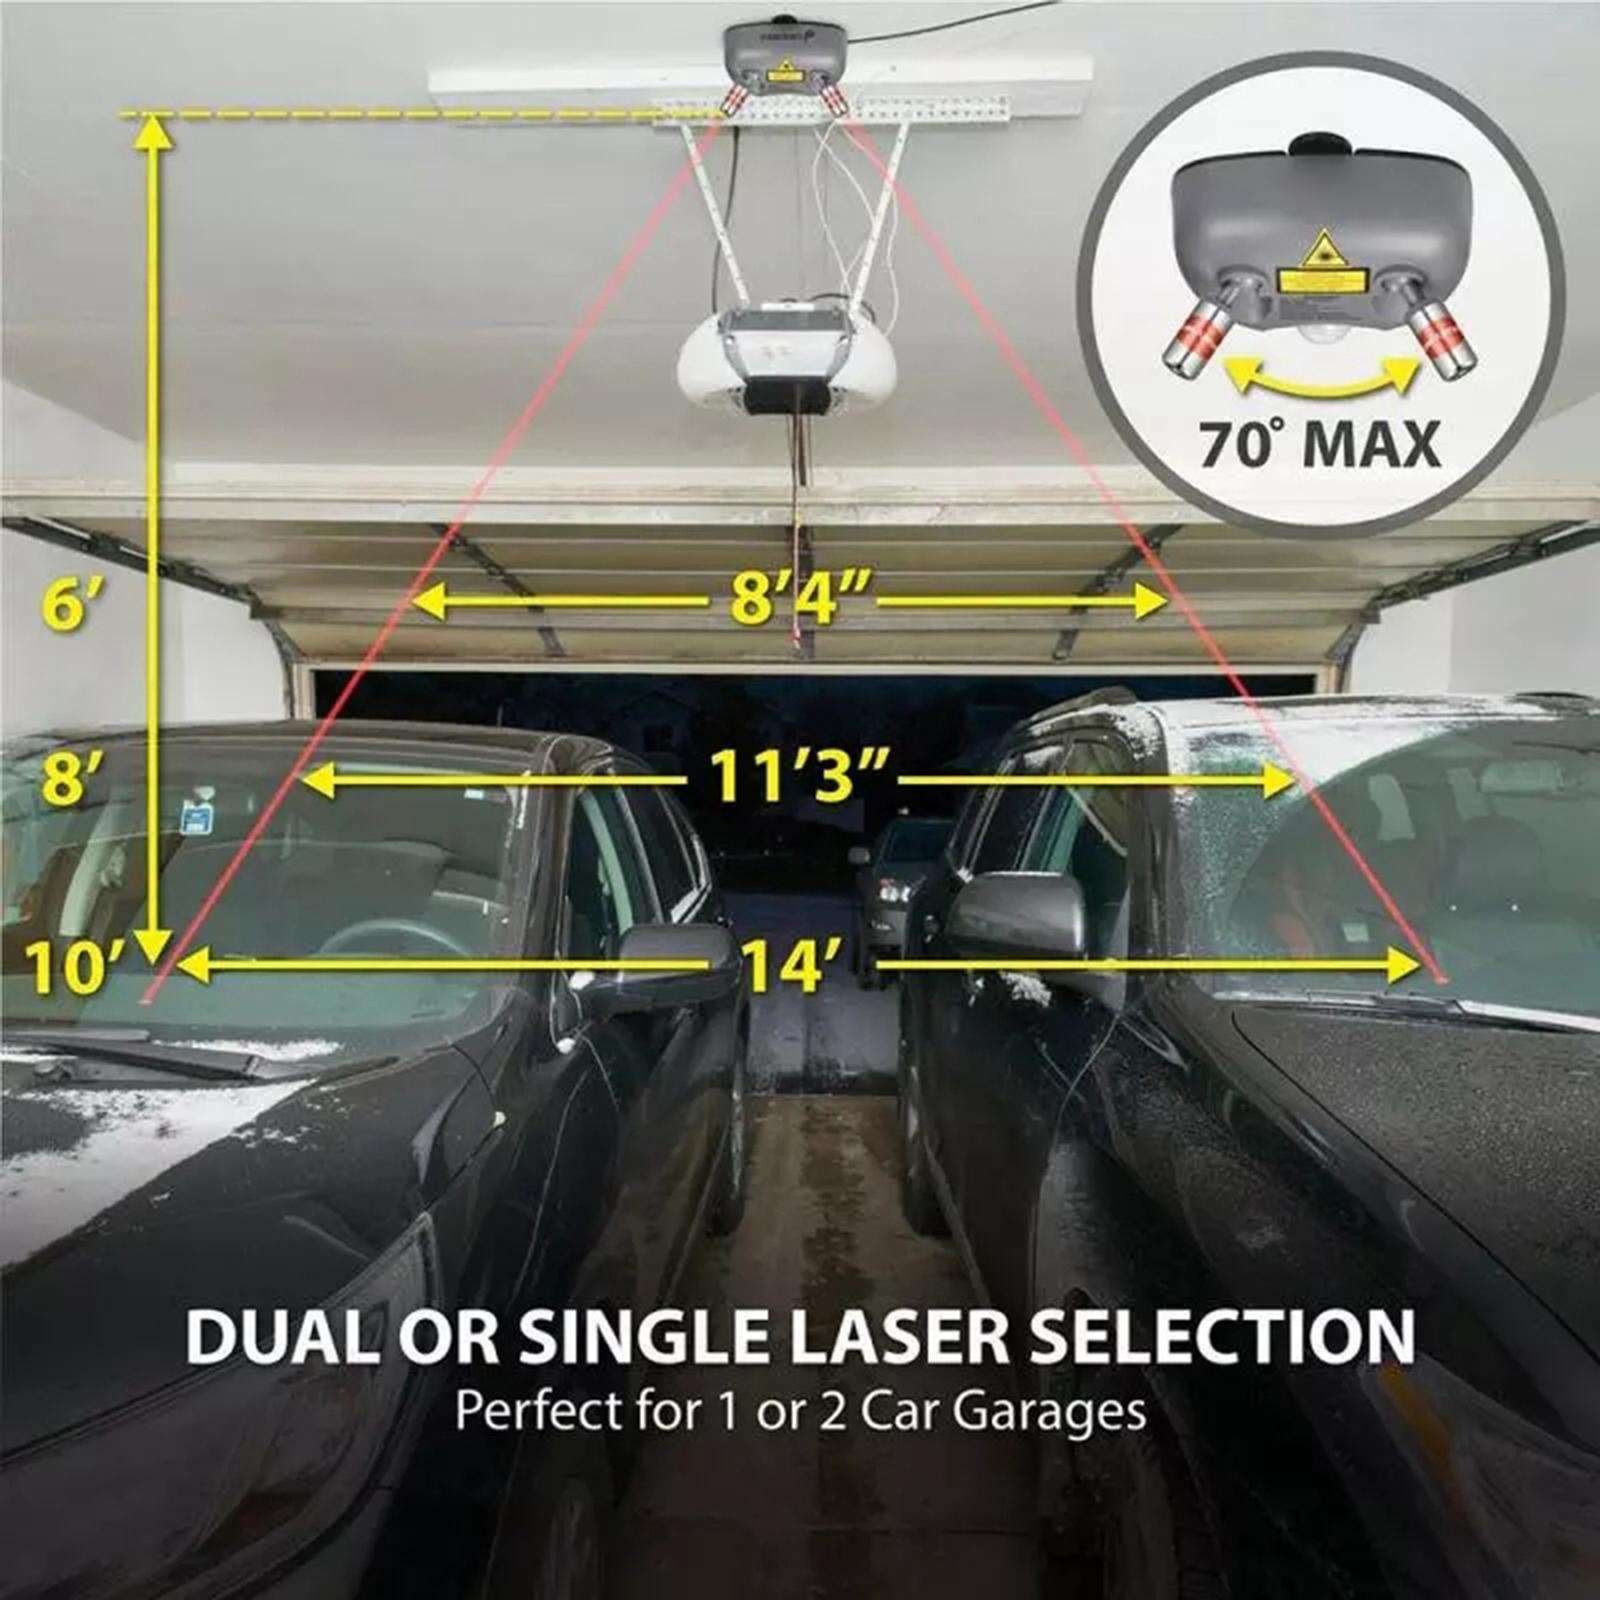 Upgrade Park Right Dual Laser Garage Parking Assist for Car SUV Safety Aid